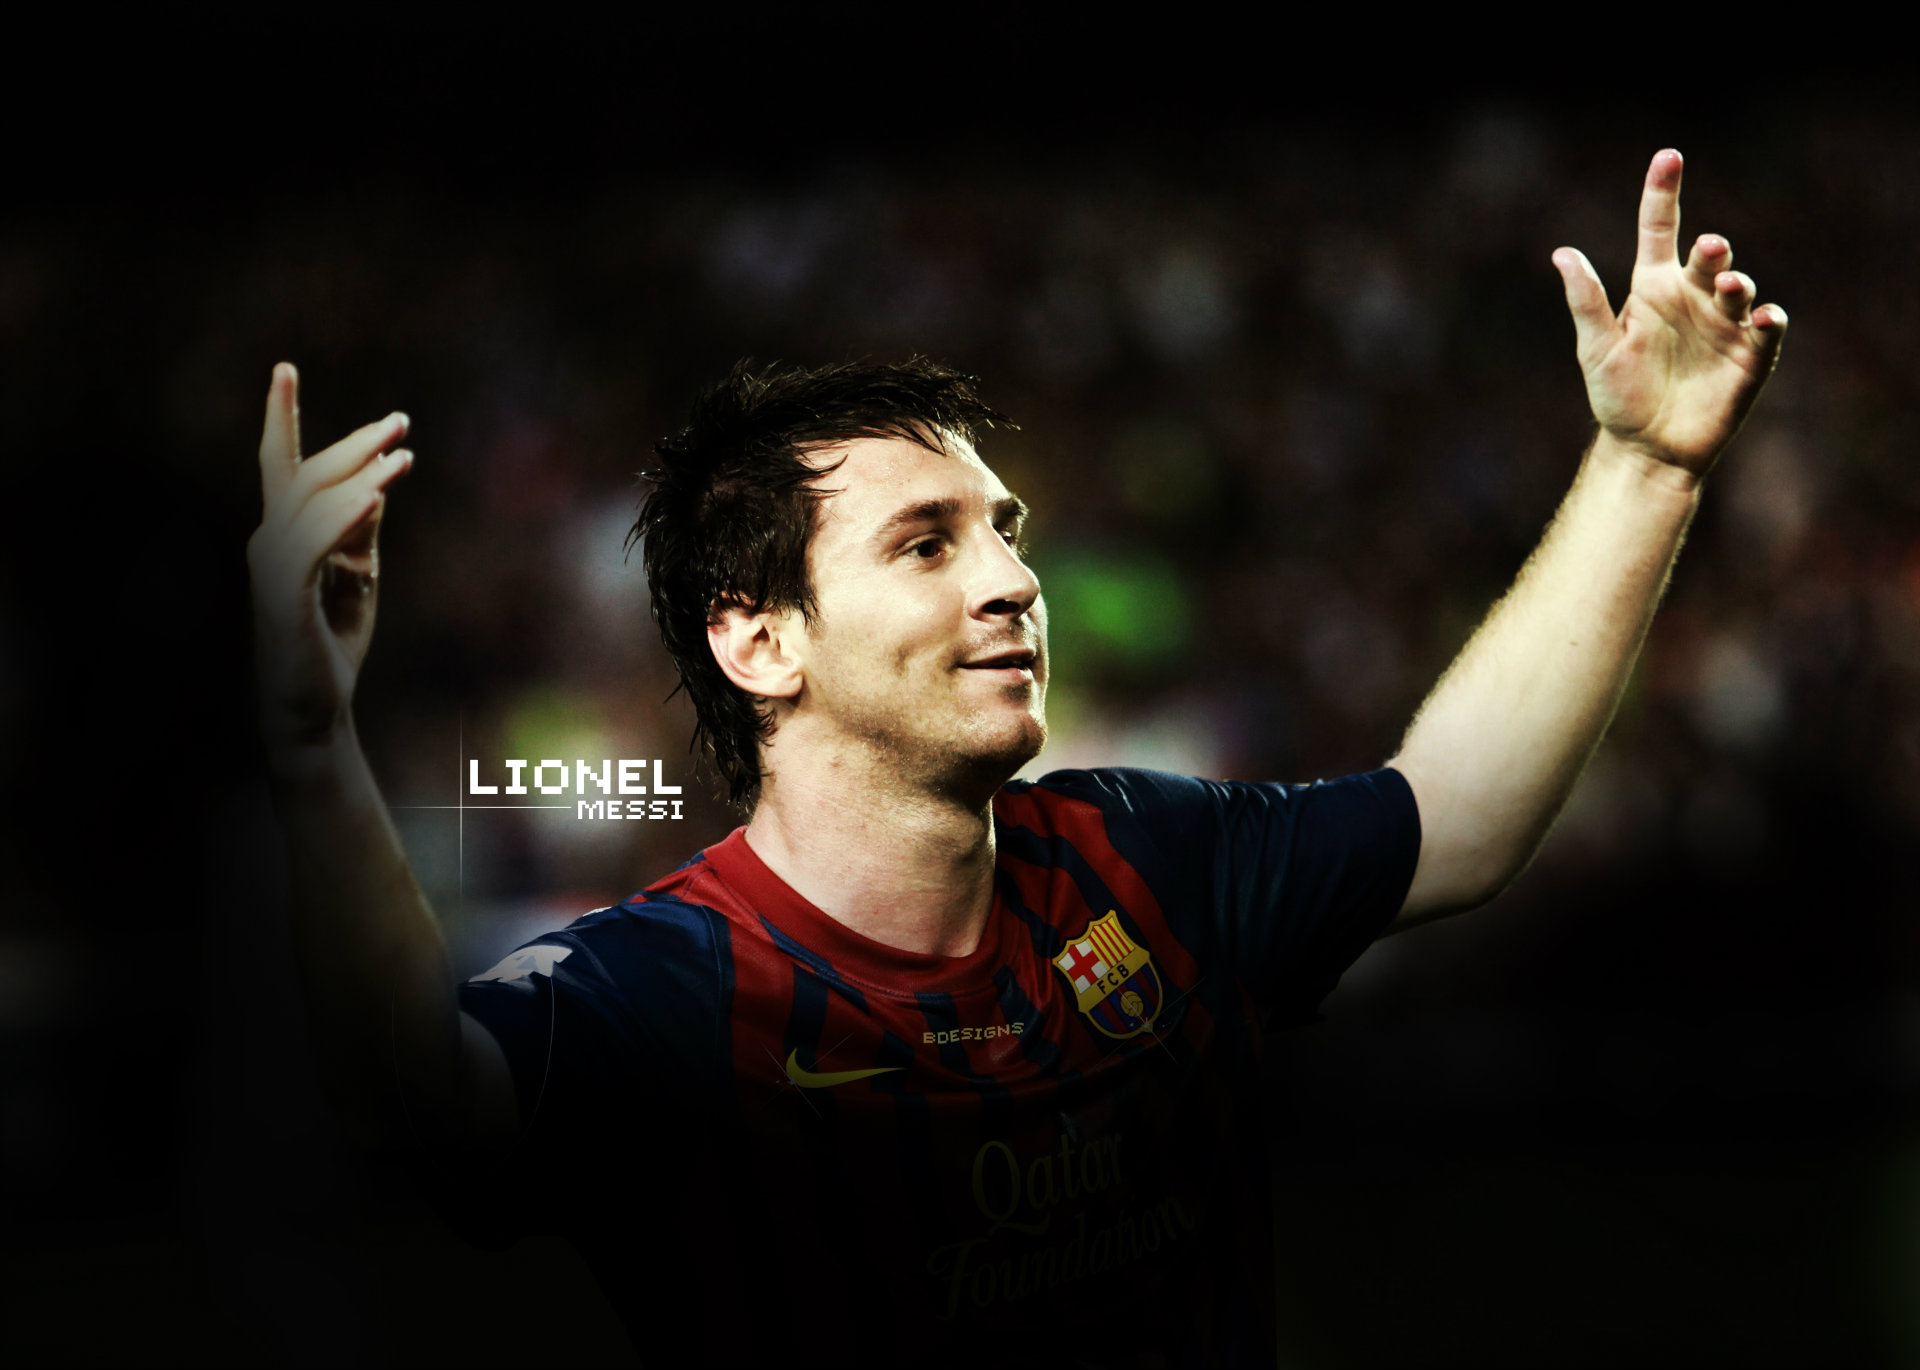  Messi 2016 Wallpaper Most HD Wallpapers Pictures Desktop Backgrounds